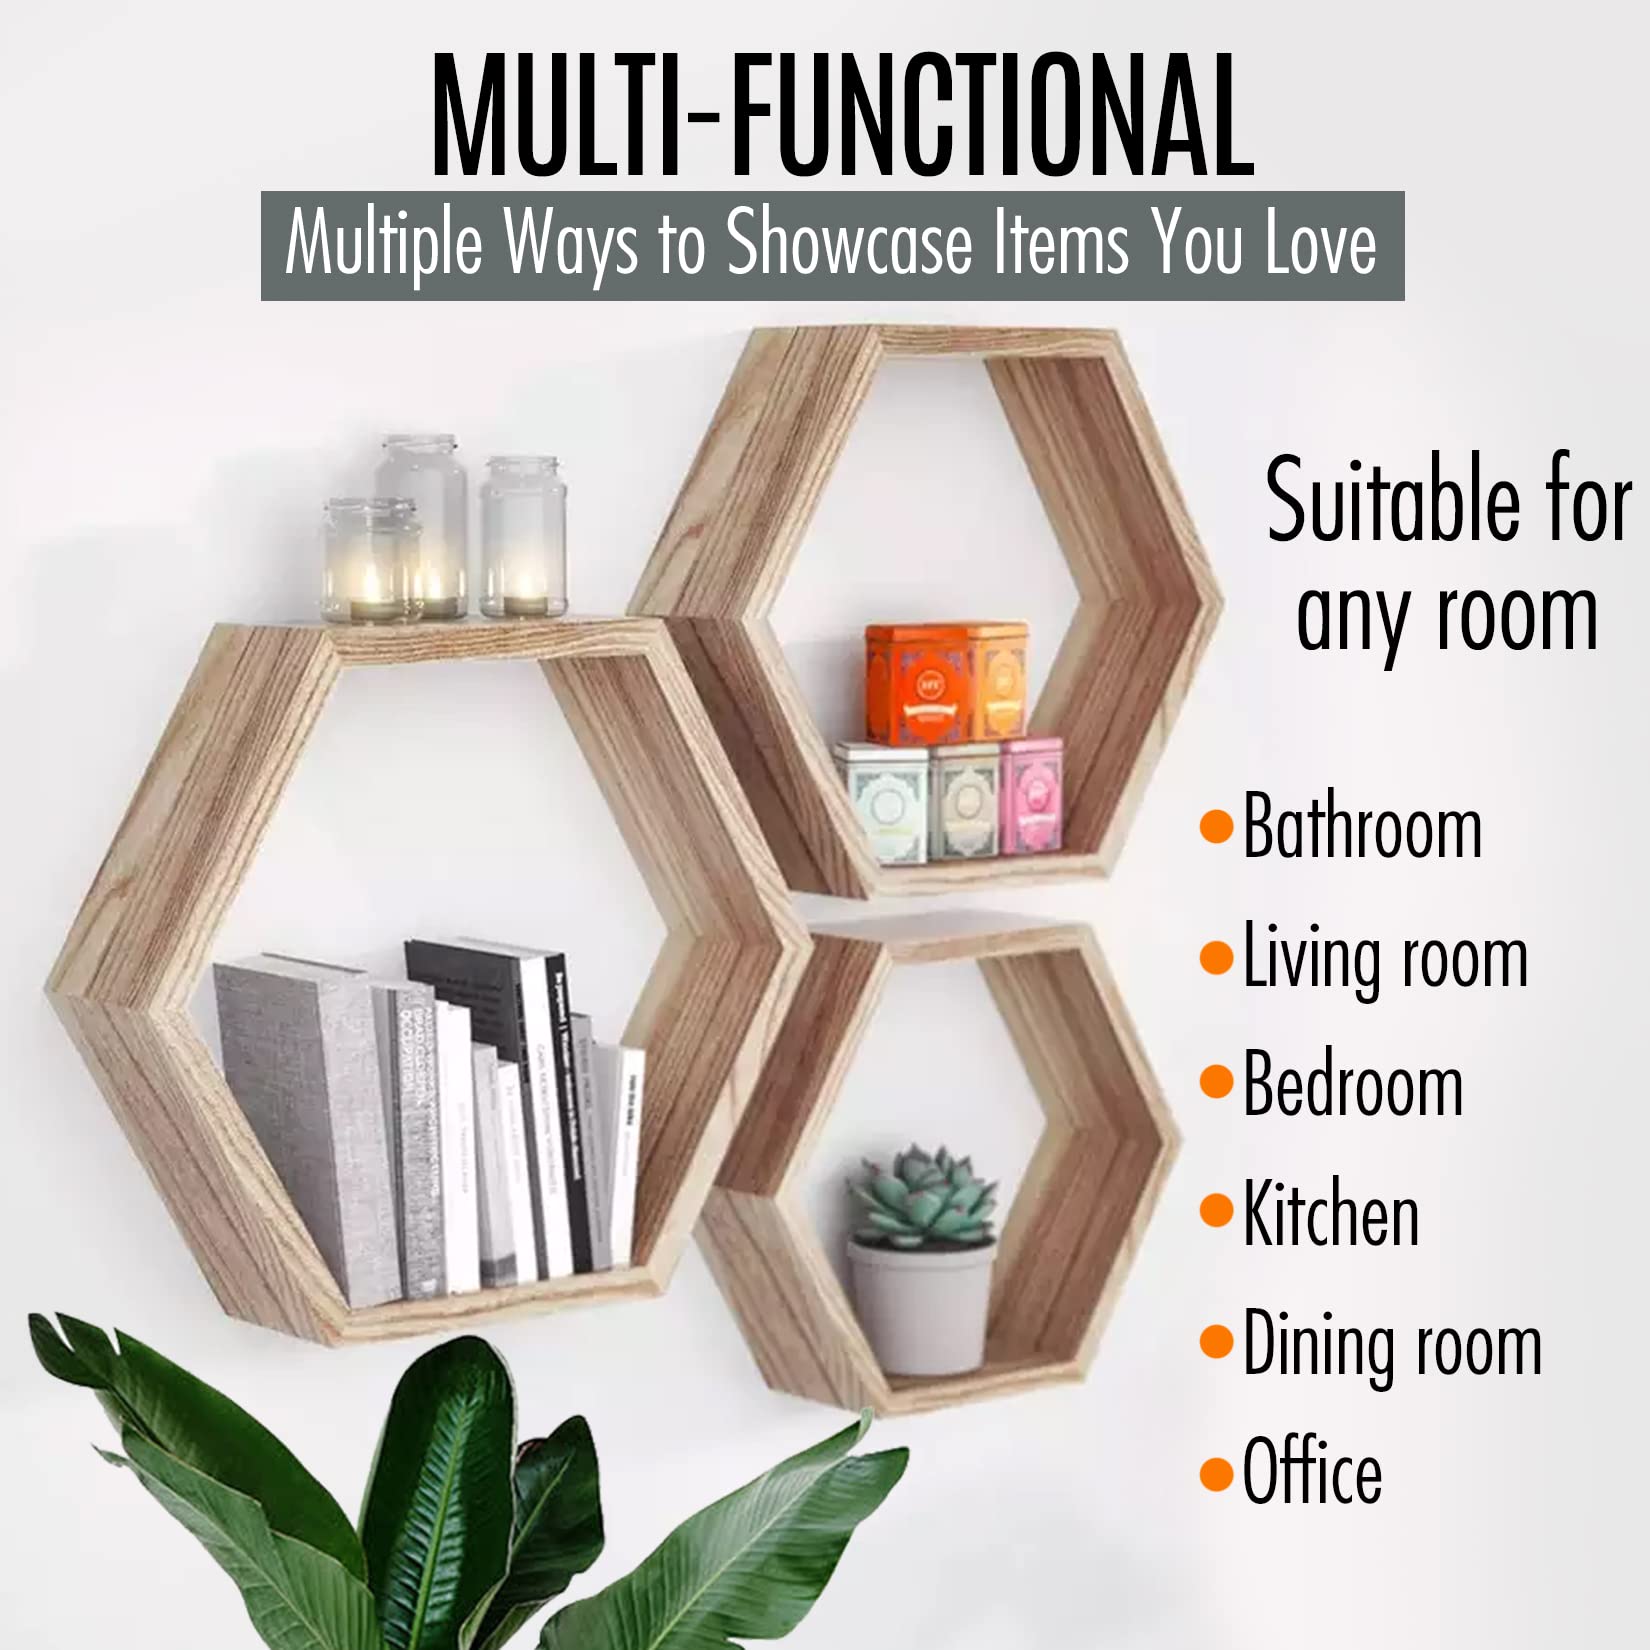 Zen Home Rustic Hexagon Floating Shelves, Set of 3, Honeycomb Shelves, Natural Wood, Kitchen, Bathroom, Living Room Home Decor, Guy Potted Plant, Artificial Hanging Plants, Wall Shelves (Rustic Brown)